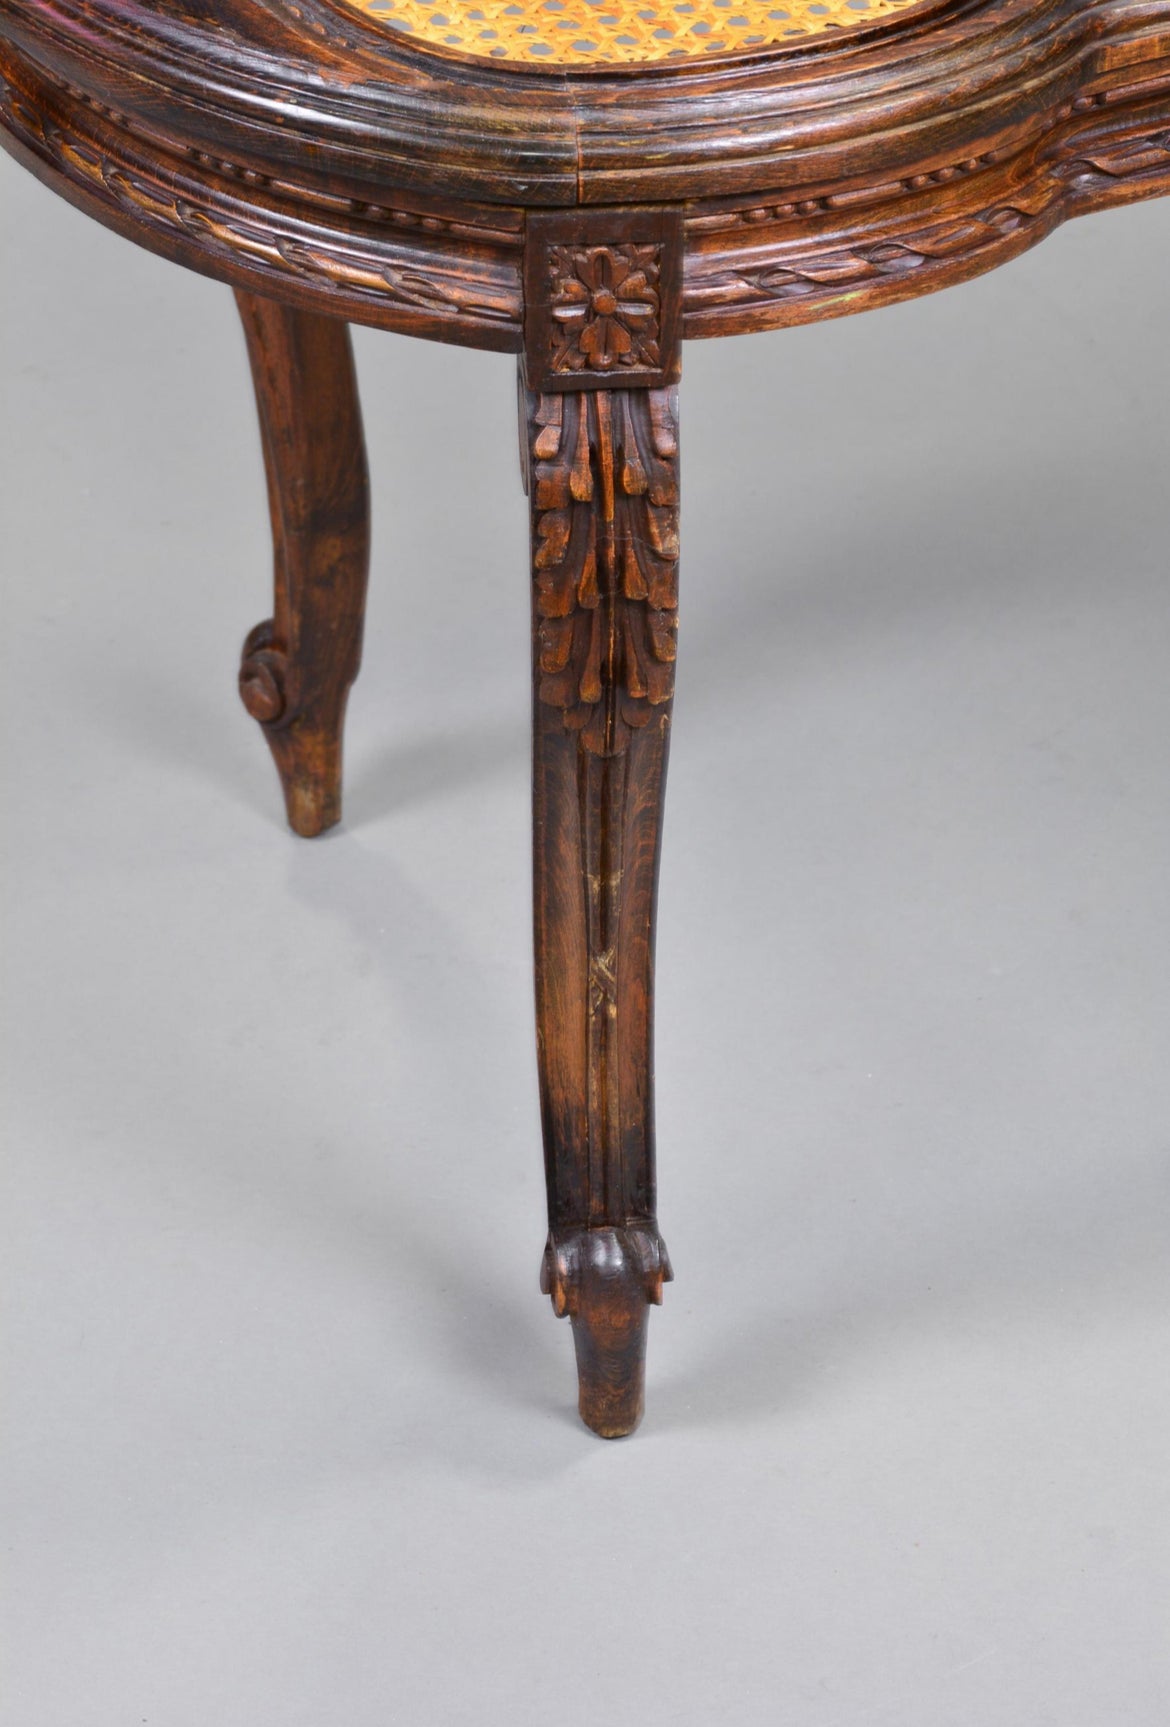 Carved Bench with woven seat